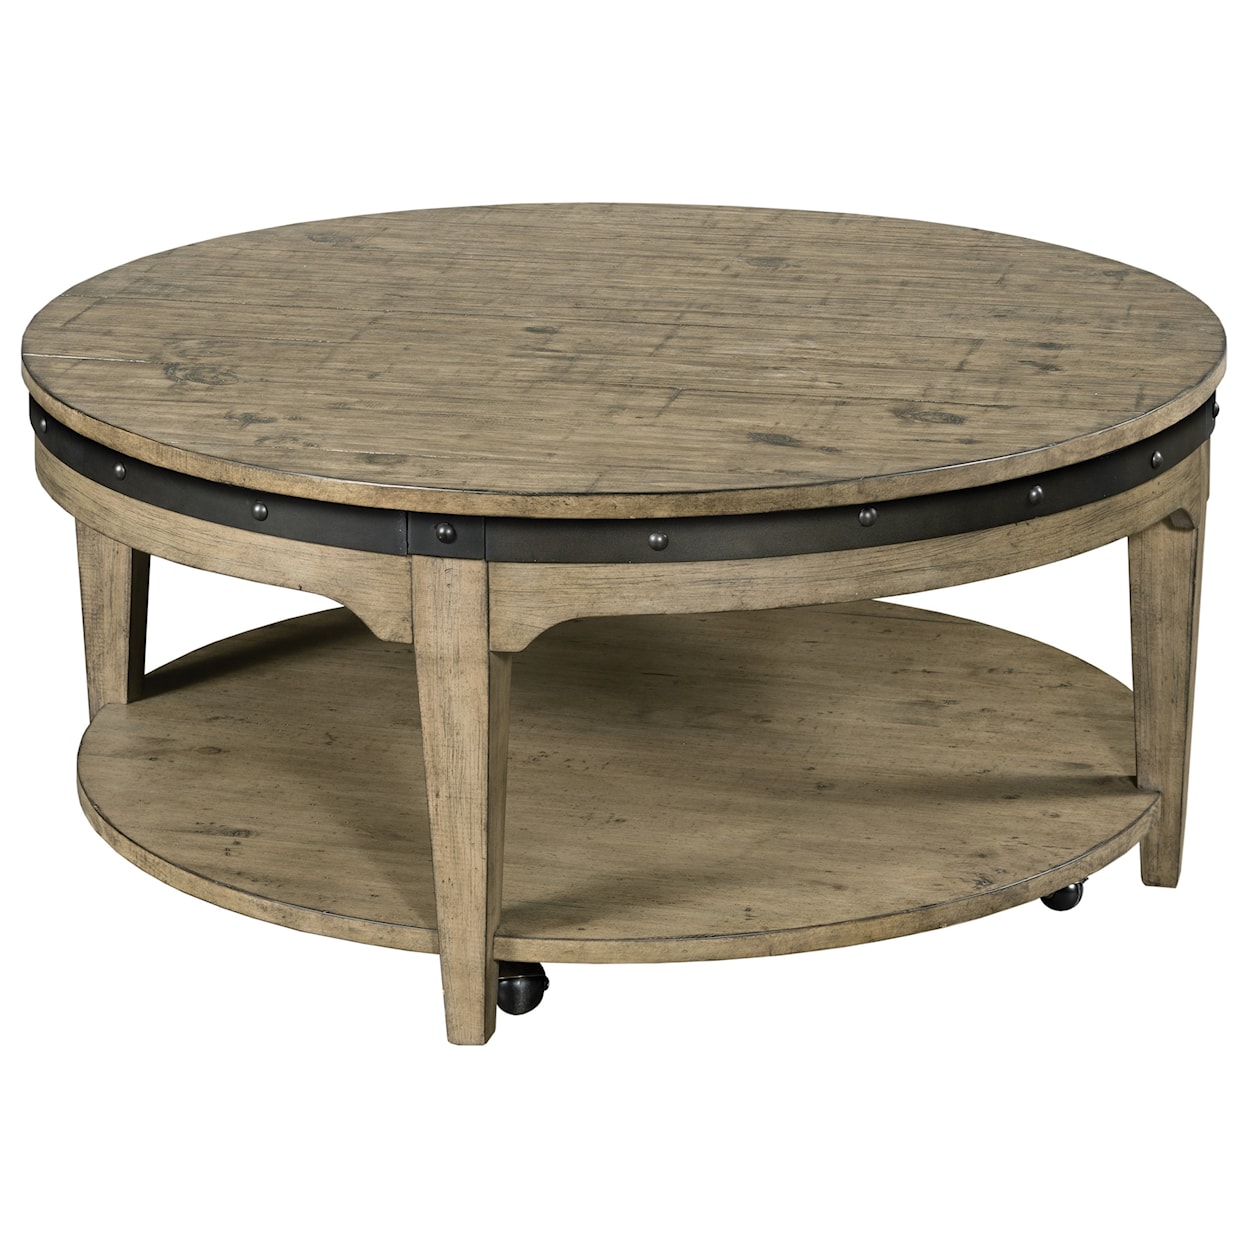 Kincaid Furniture Plank Road Artisans Round Cocktail Table               